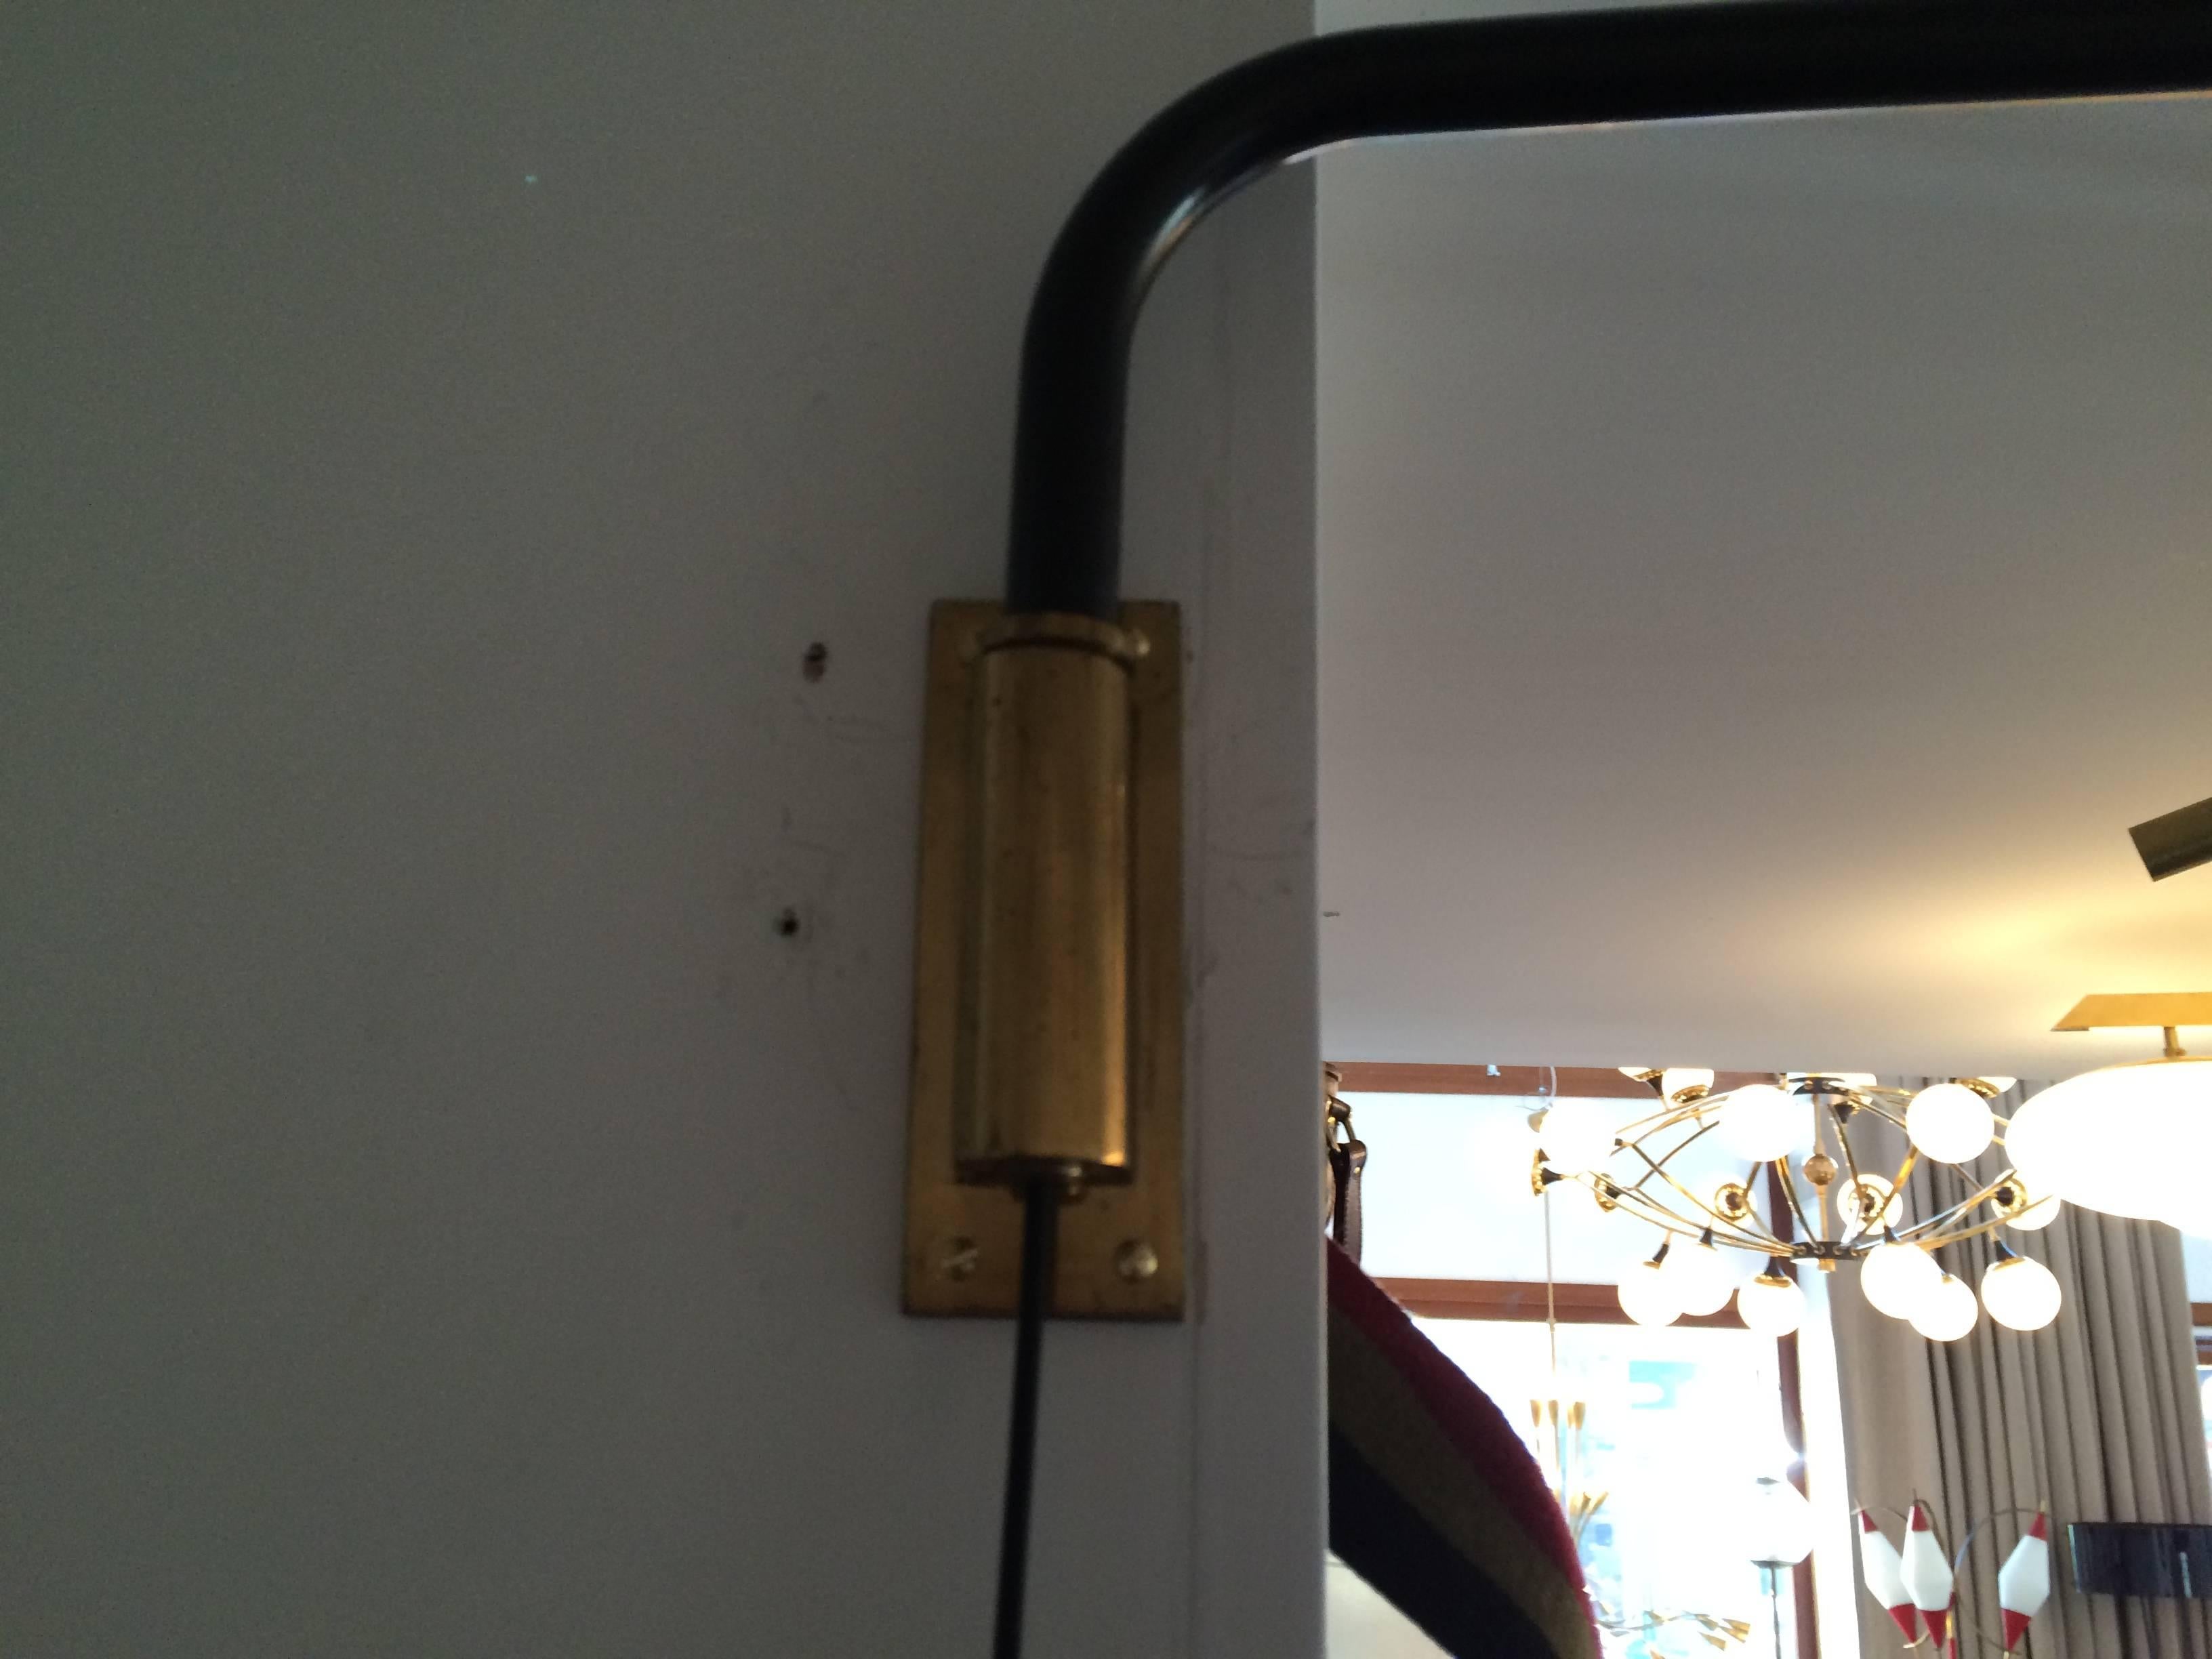 All brass fittings with black enameled telescopic (adjustable)
arm that swivels 180 degrees. Can be mounted at any height.
Linen shade pendant is also adjustable. Very flexible design.
Has been rewired with step on floor switch, circa 1960.
 